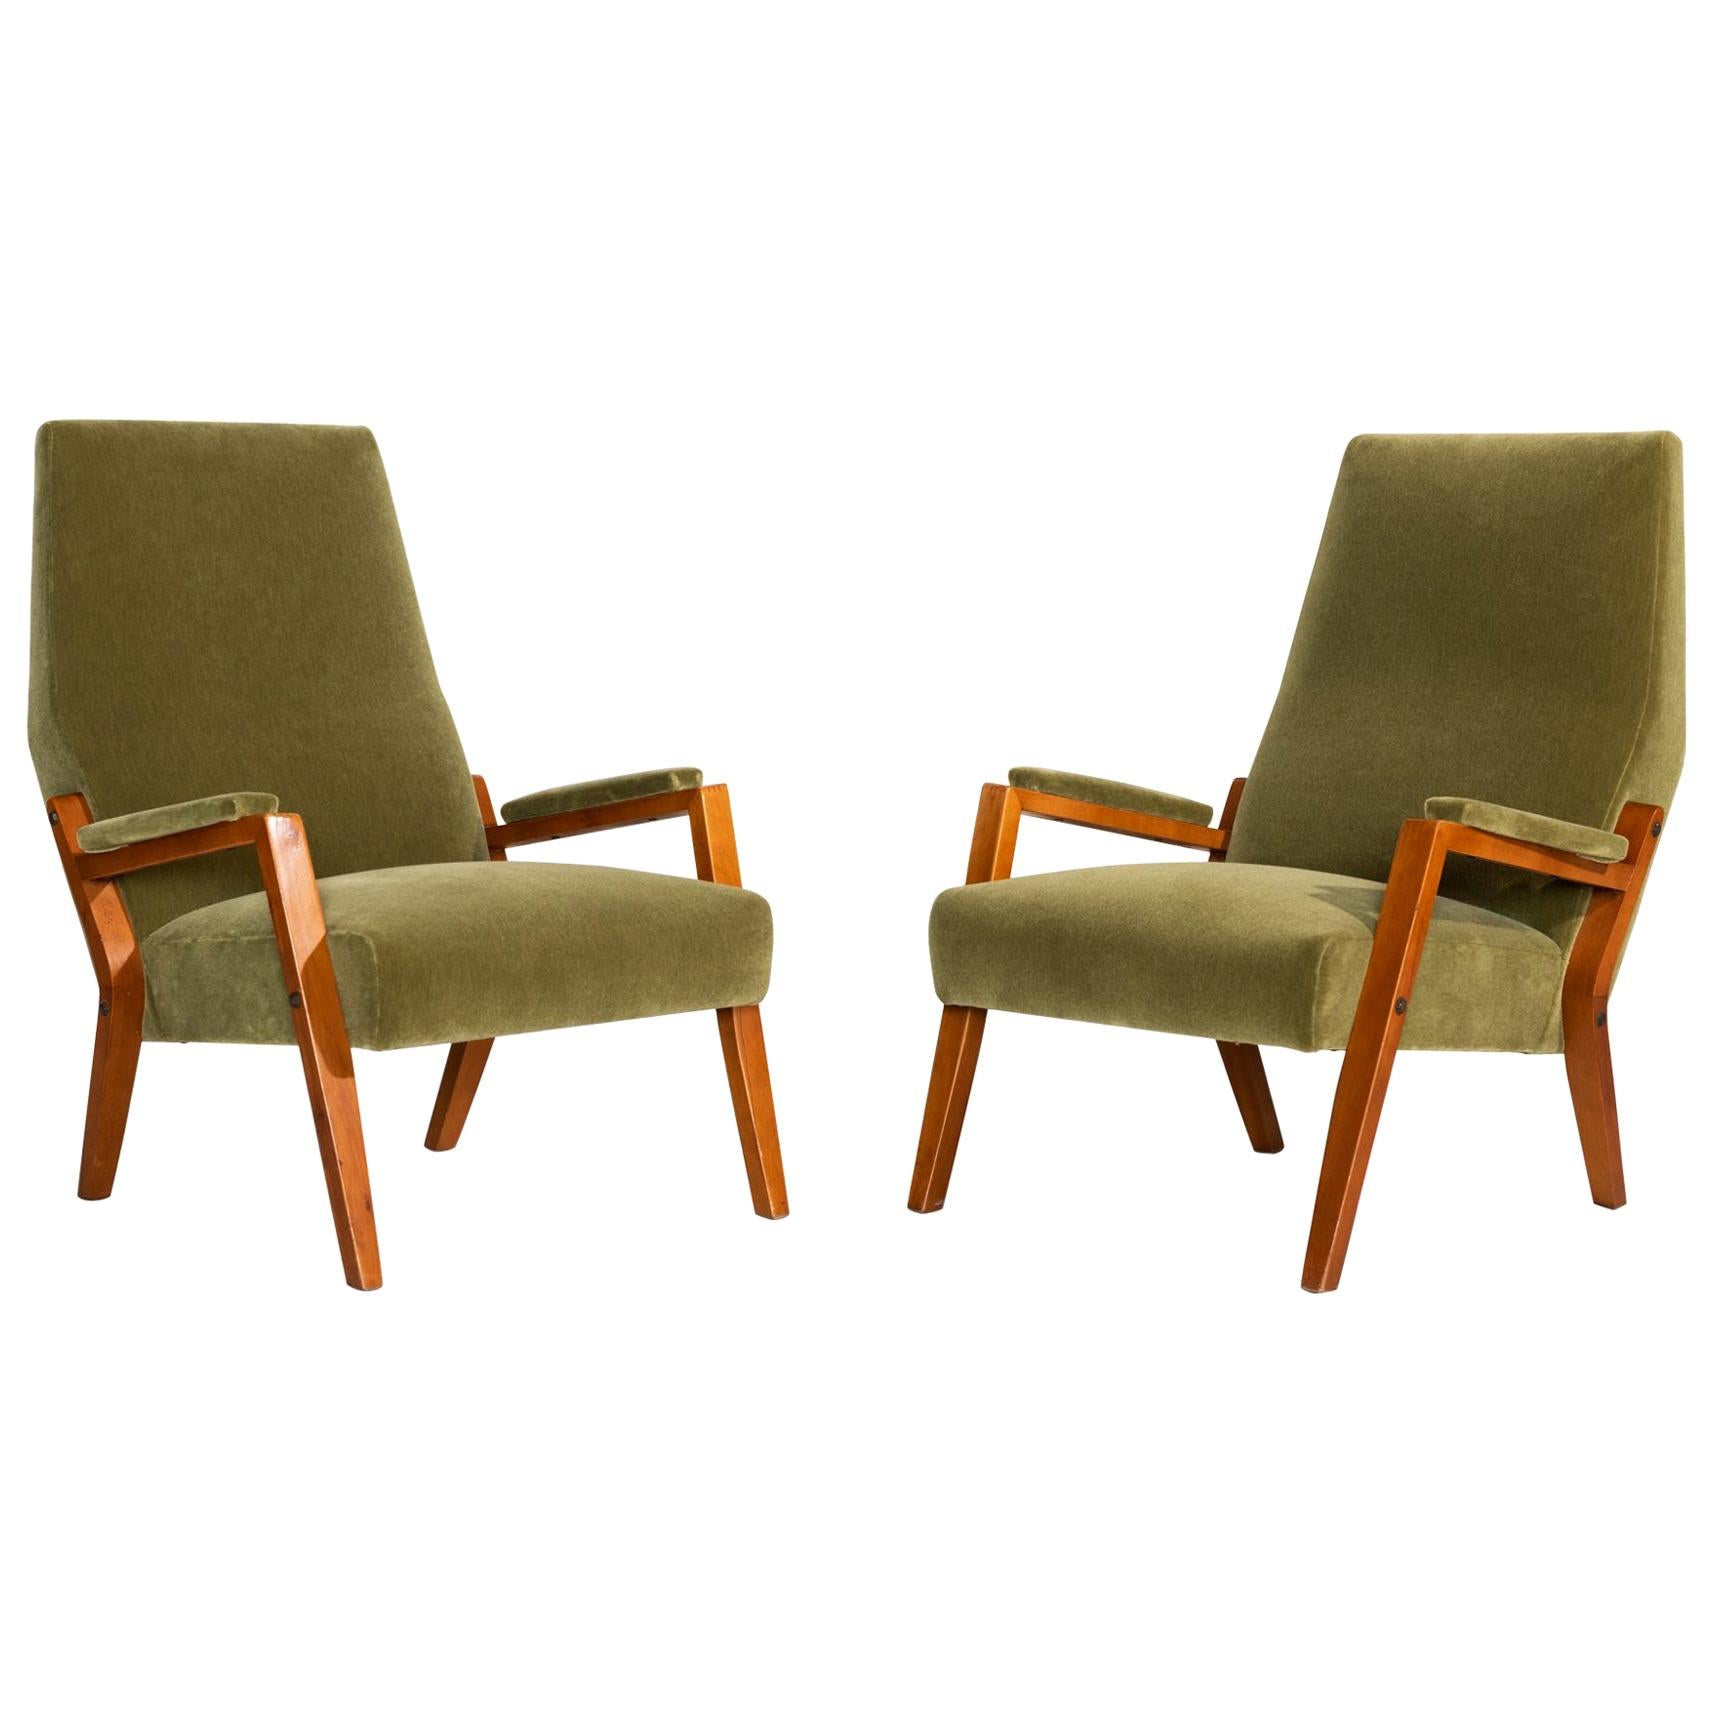 Pair of Mohair Lounge Chairs, Italy, circa 1960